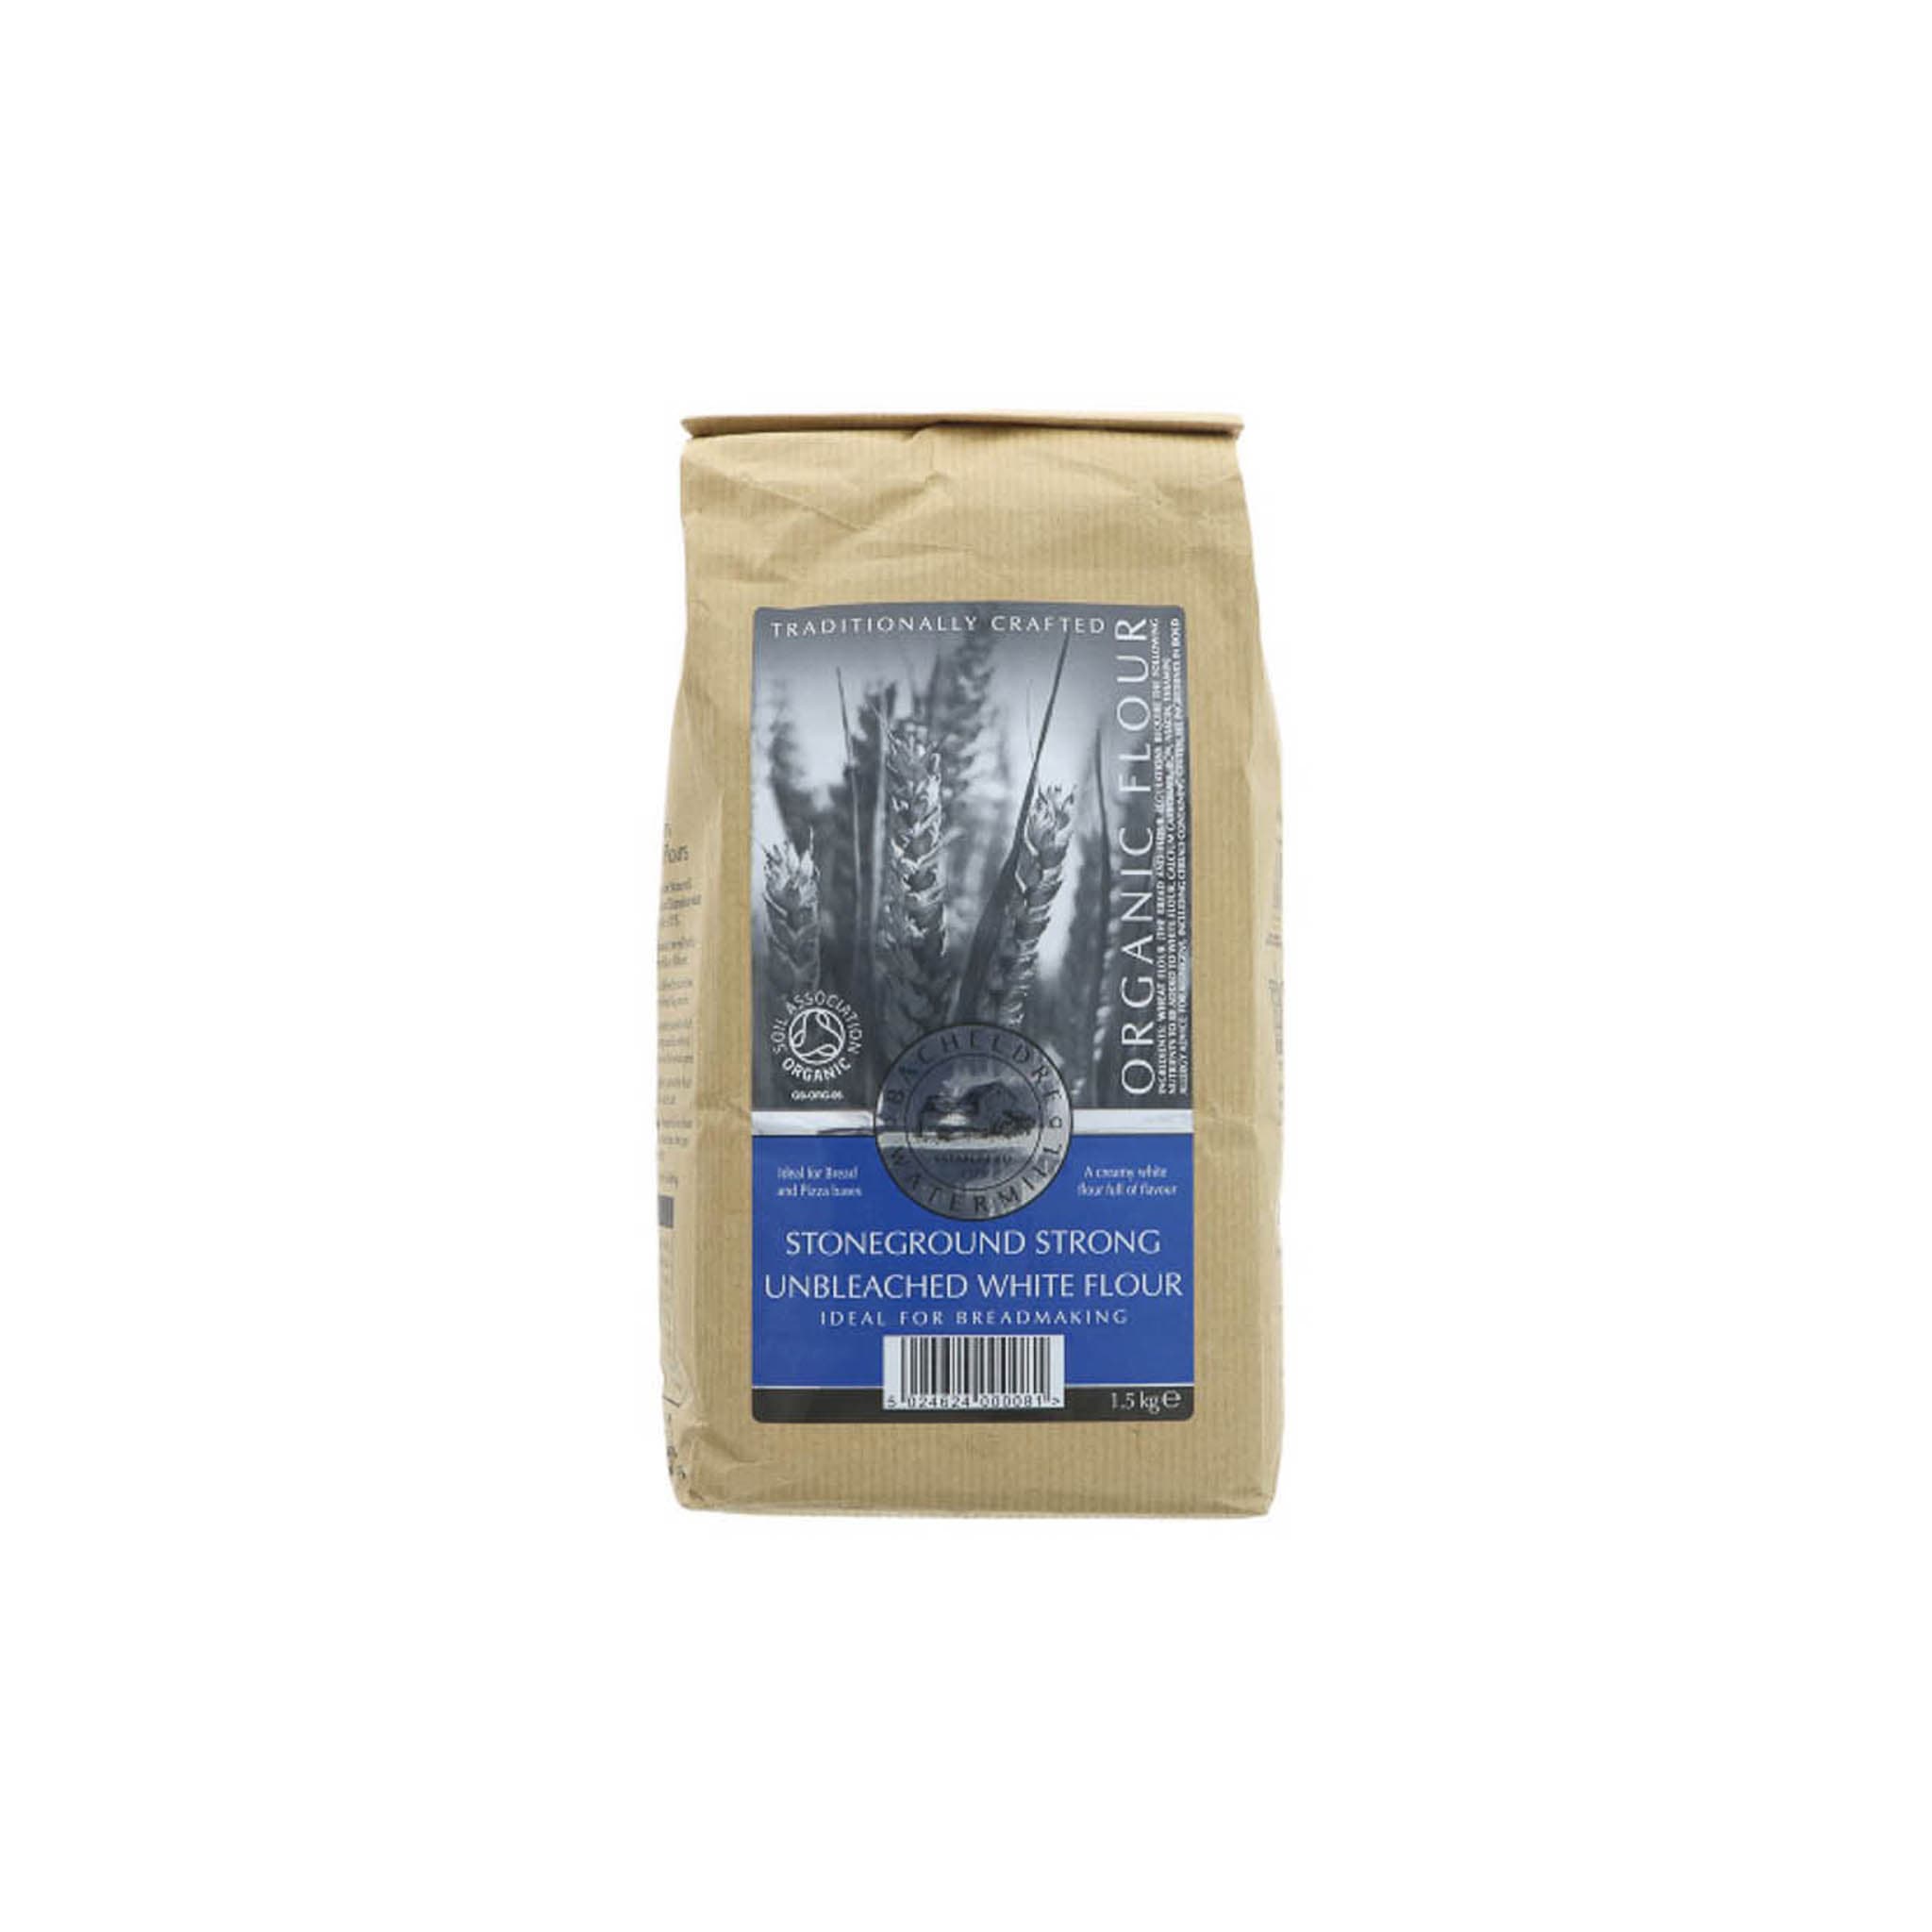 Bacheldre Organic Stoneground Unbleached Strong White Flour, 1.5kg